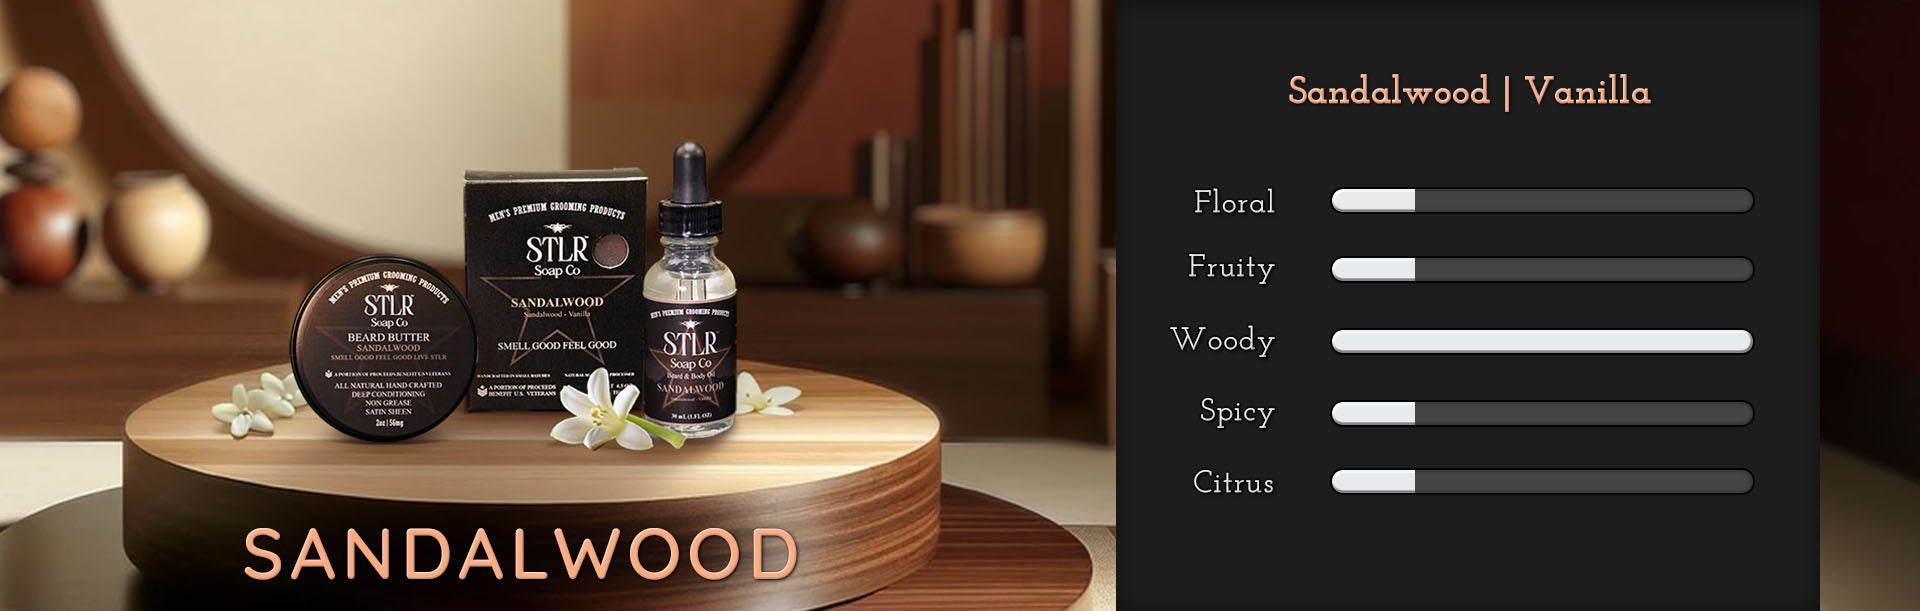 graphic featuring a scale of scent notes for STLR's Sandalwood Men's Soap